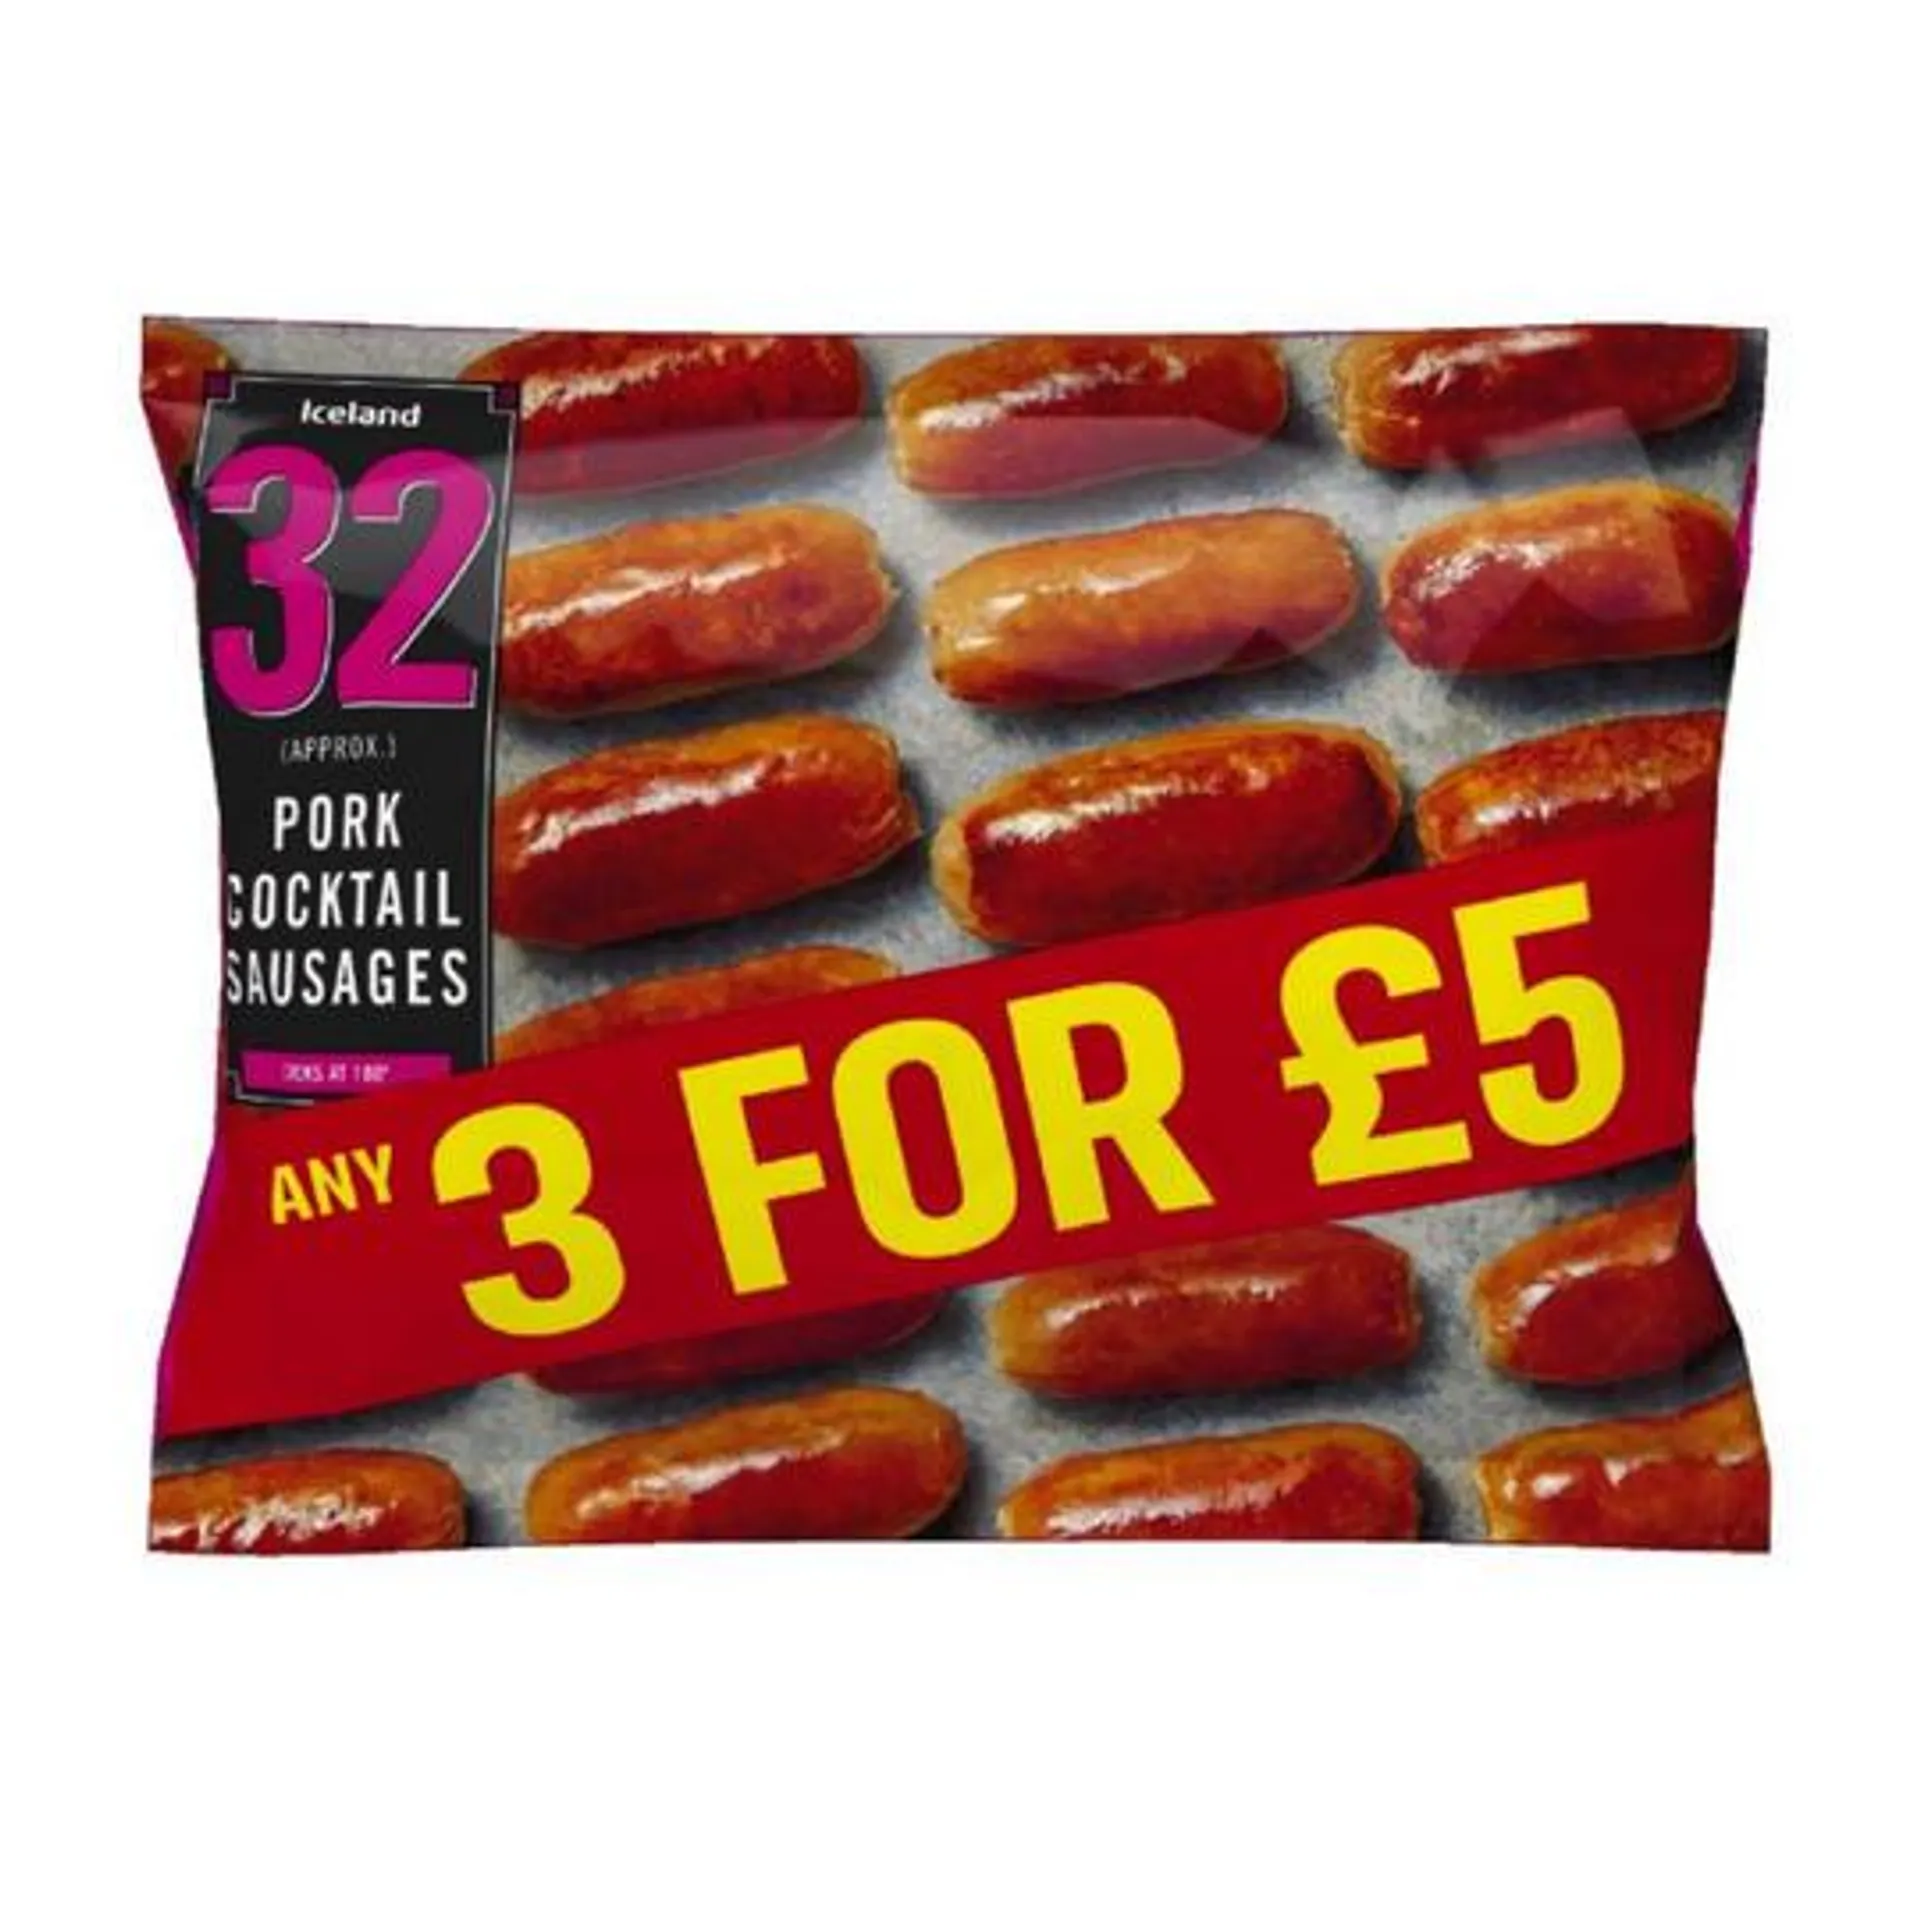 Iceland 32 (approx.) Pork Cocktail Sausages 448g